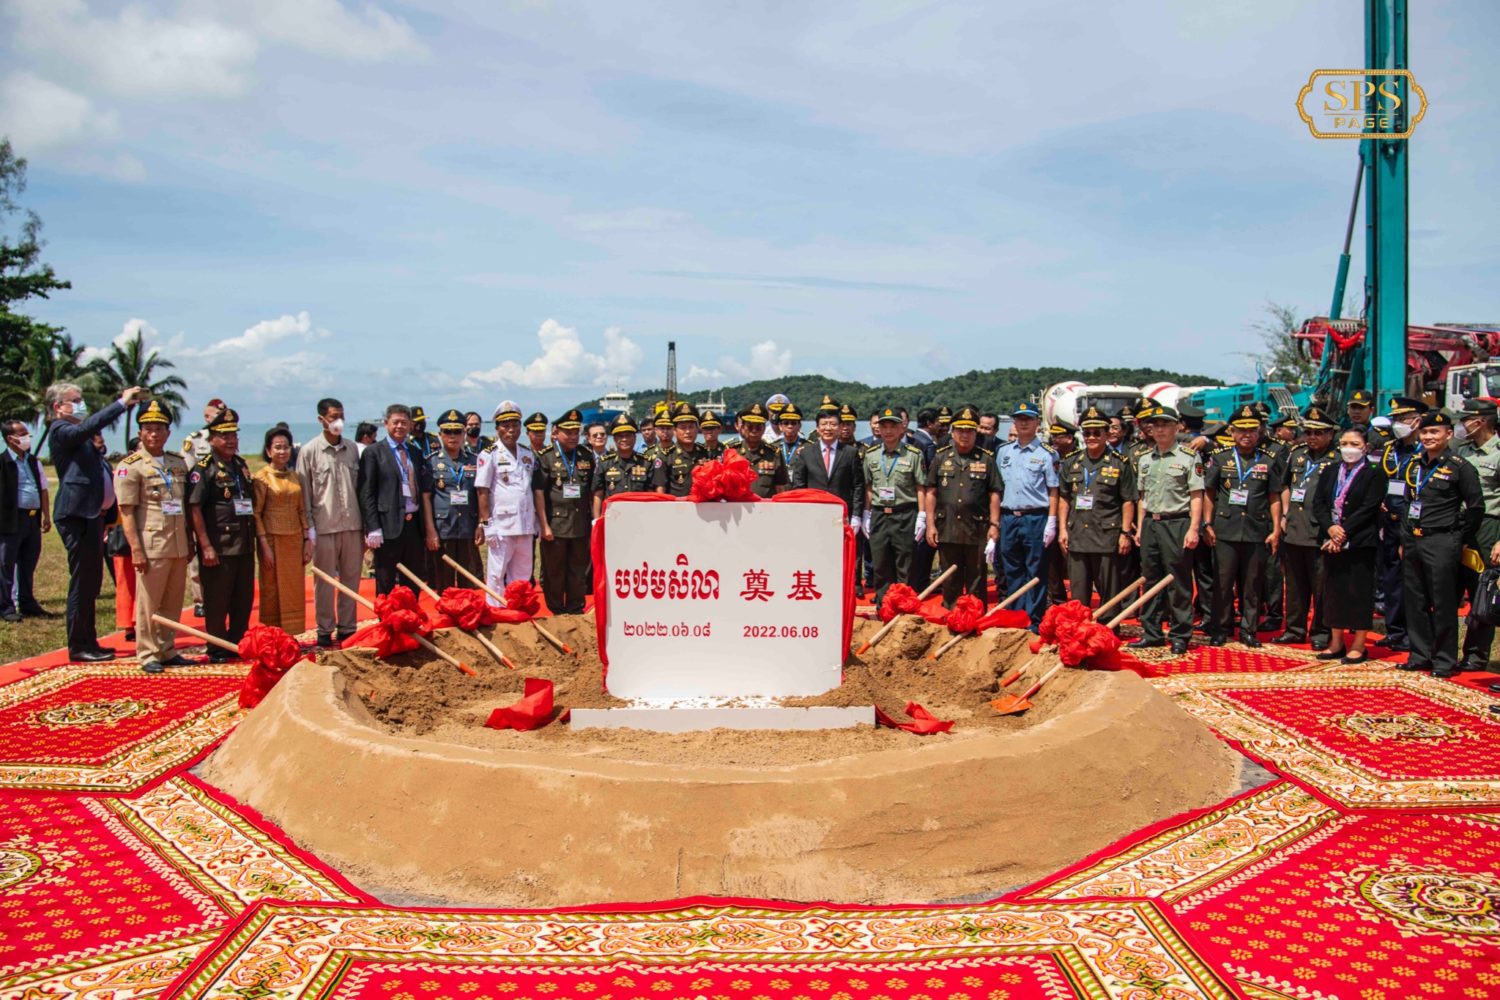 The groundbreaking ceremony for a new ship maintenance facility at Ream Naval Base, posted to Defense Minister Tea Banh's Facebook page on June 8, 2022.